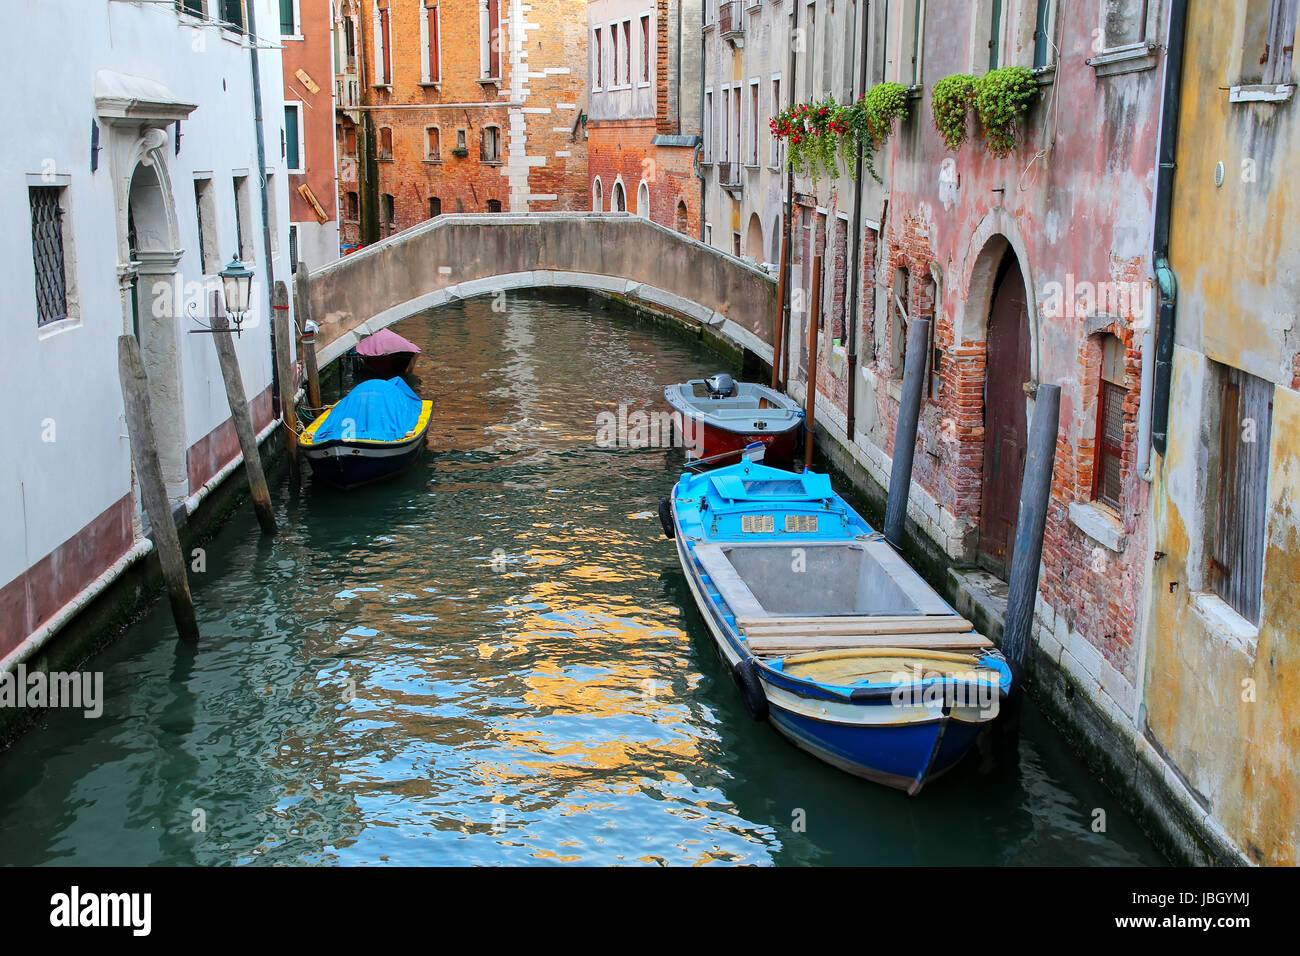 Boats moored in a narrow canal in Venice, Italy. Venice is situated across a group of 117 small islands that are separated by canals and linked by bri Stock Photo